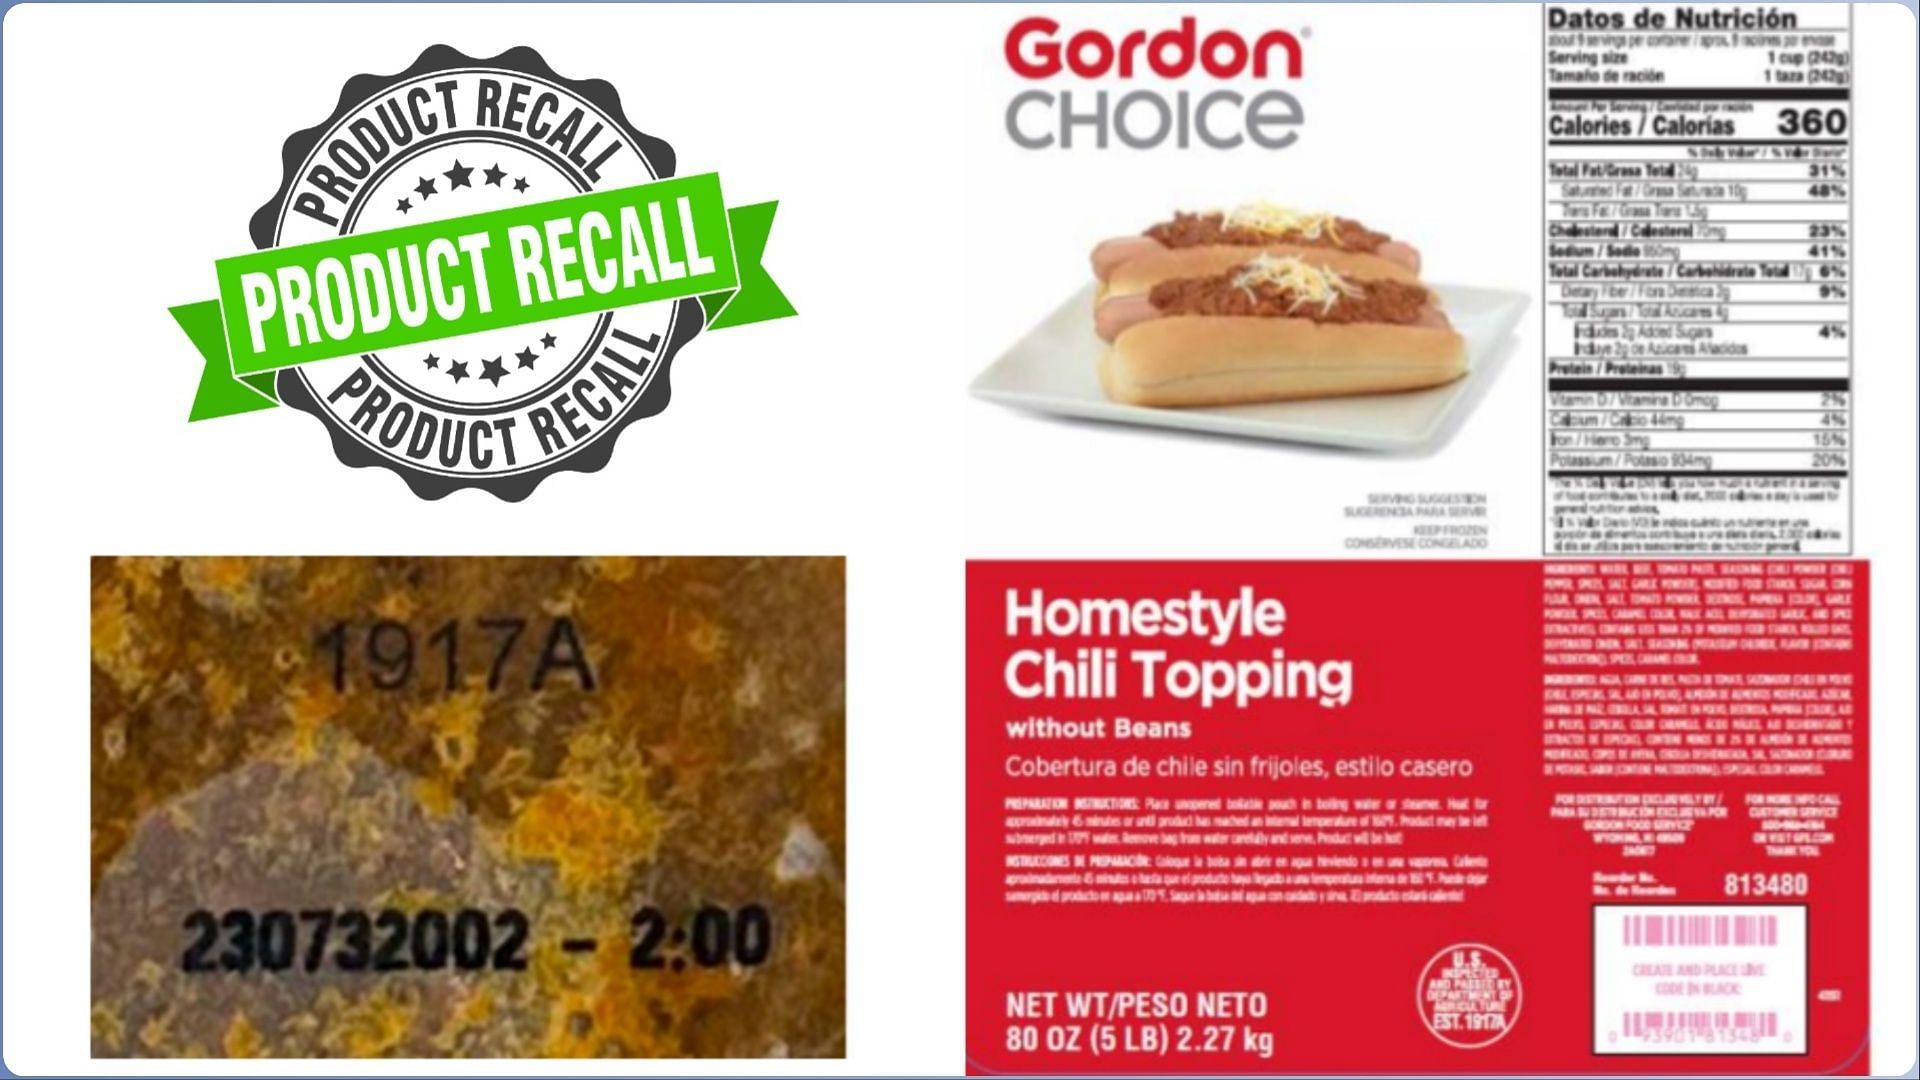 J.T.M. Provisions Company recalls Gordon Choice Homestyle Chili Topping product over undeclared soy allergen concerns (Image via FSIS)